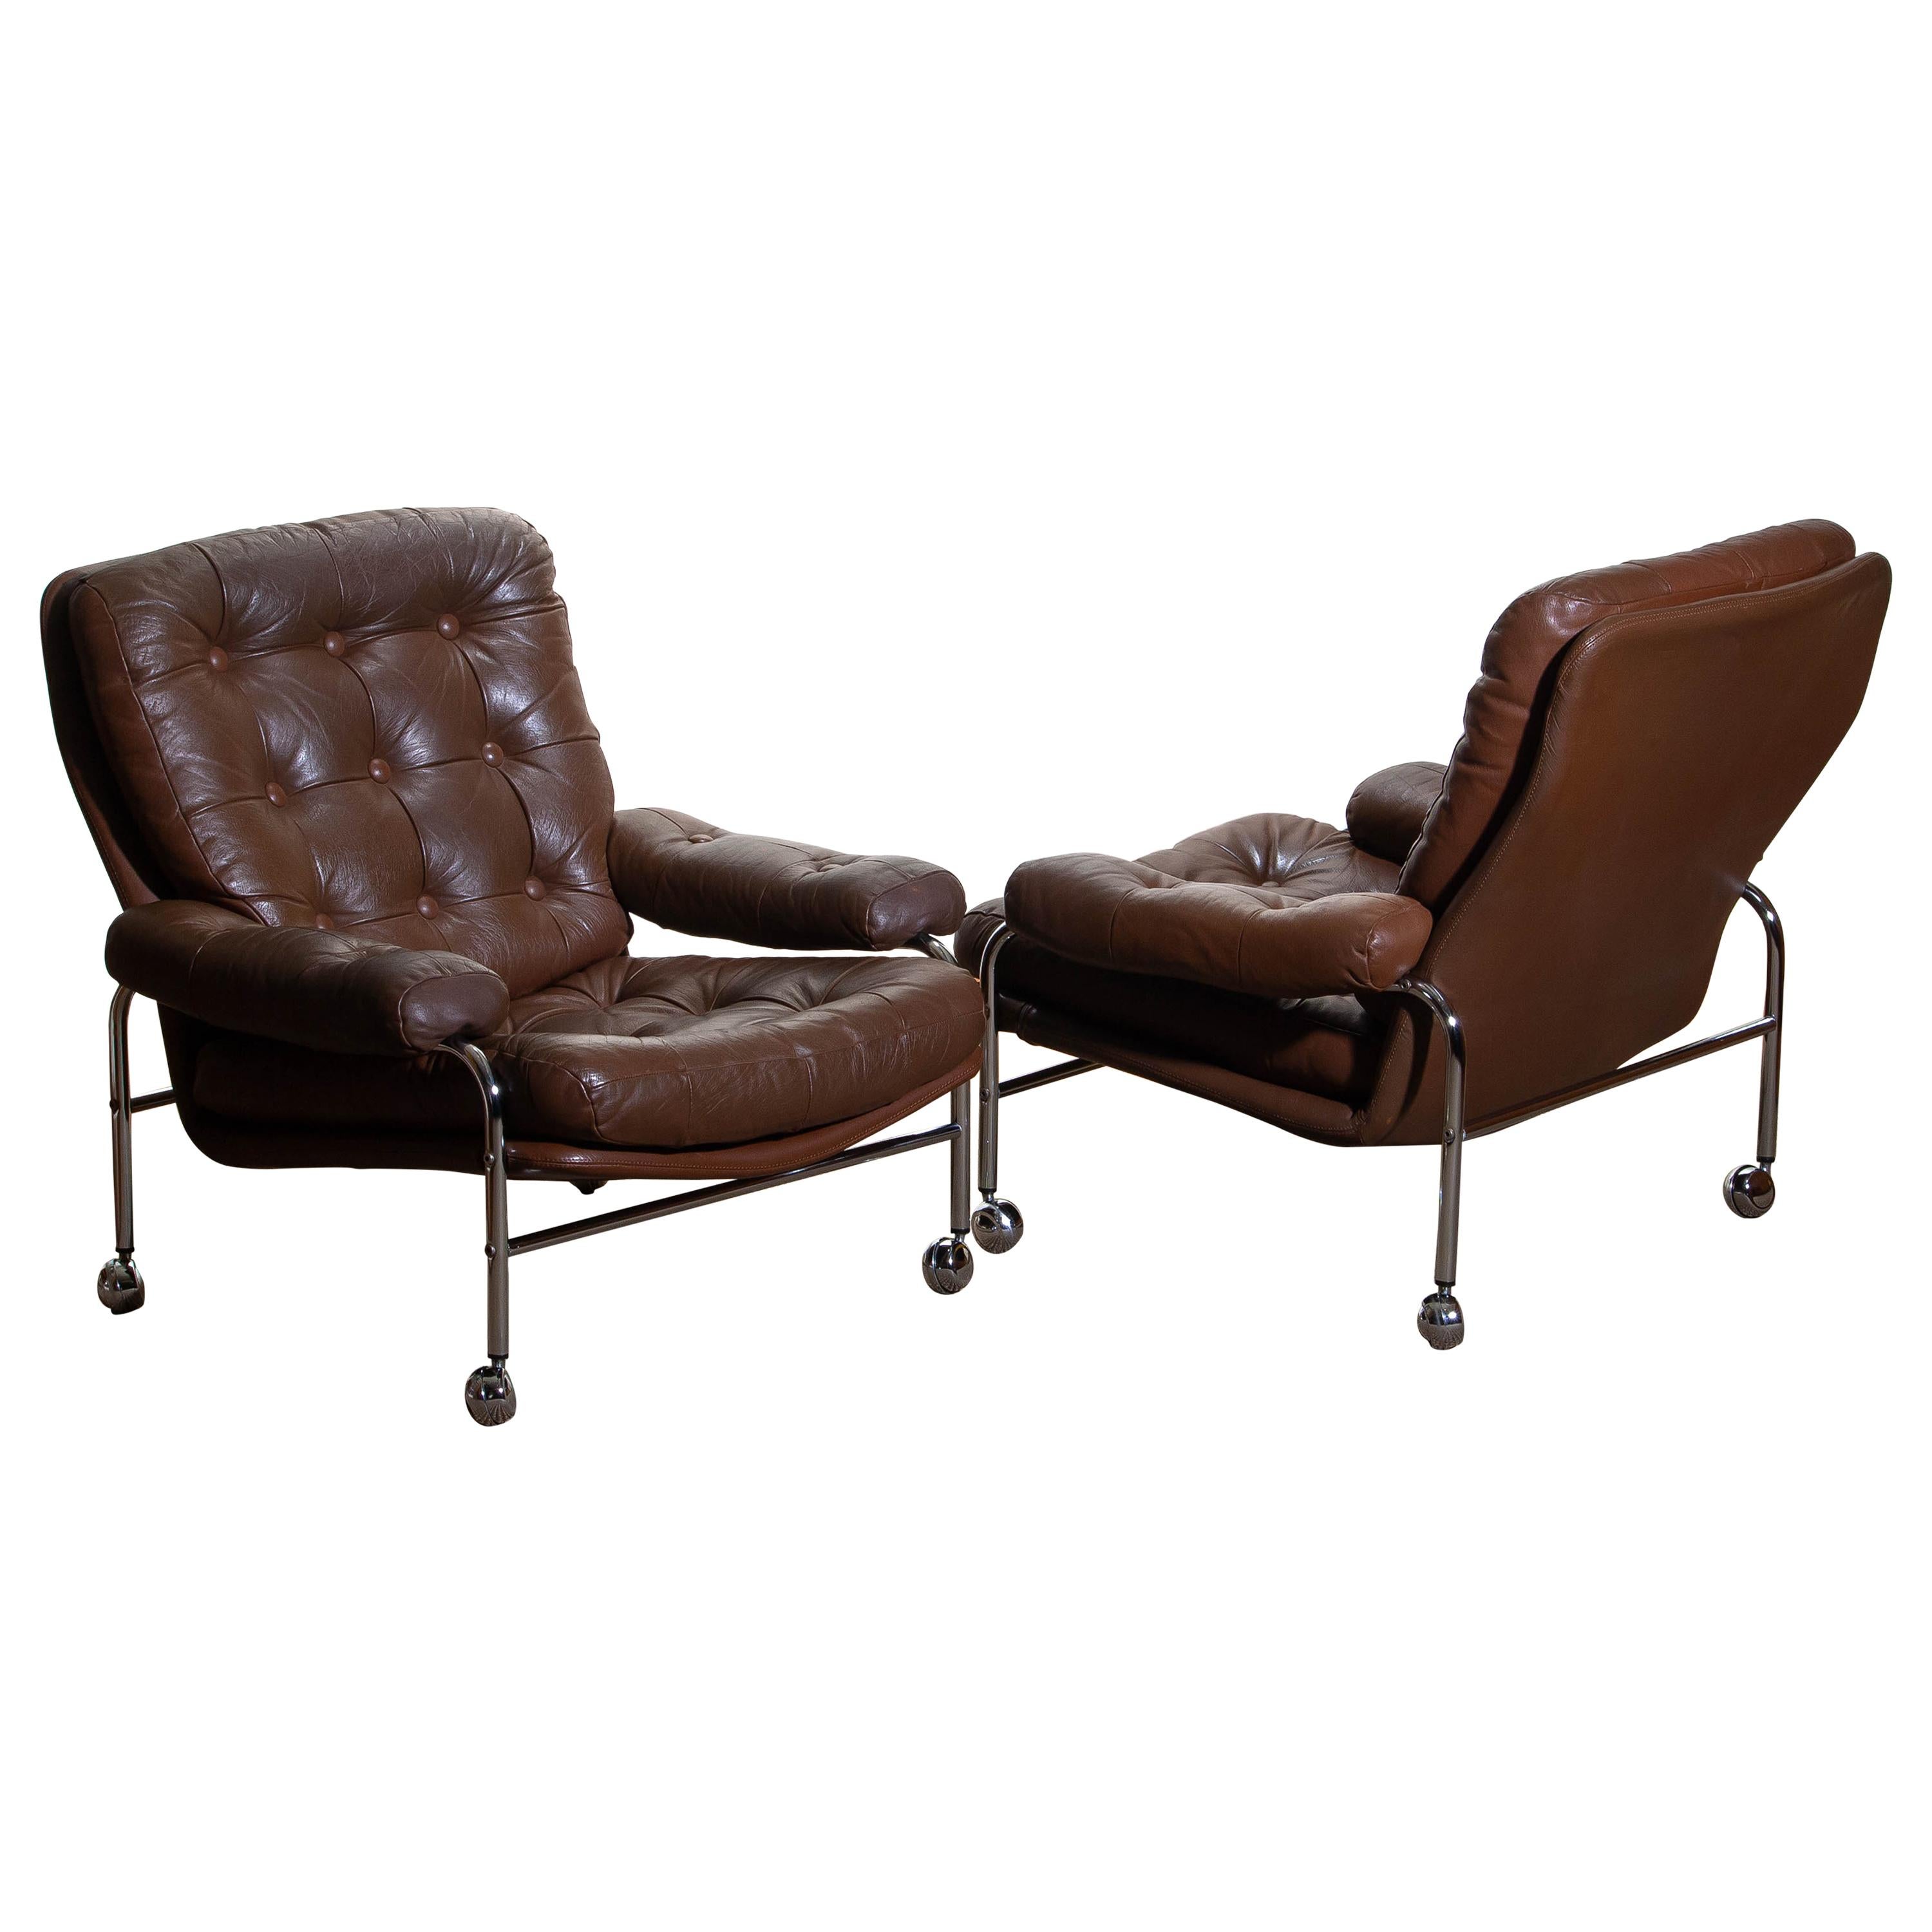 1970s, Chrome and Brown Leather Lounge Chairs by Scapa Rydaholm, Sweden In Good Condition In Silvolde, Gelderland